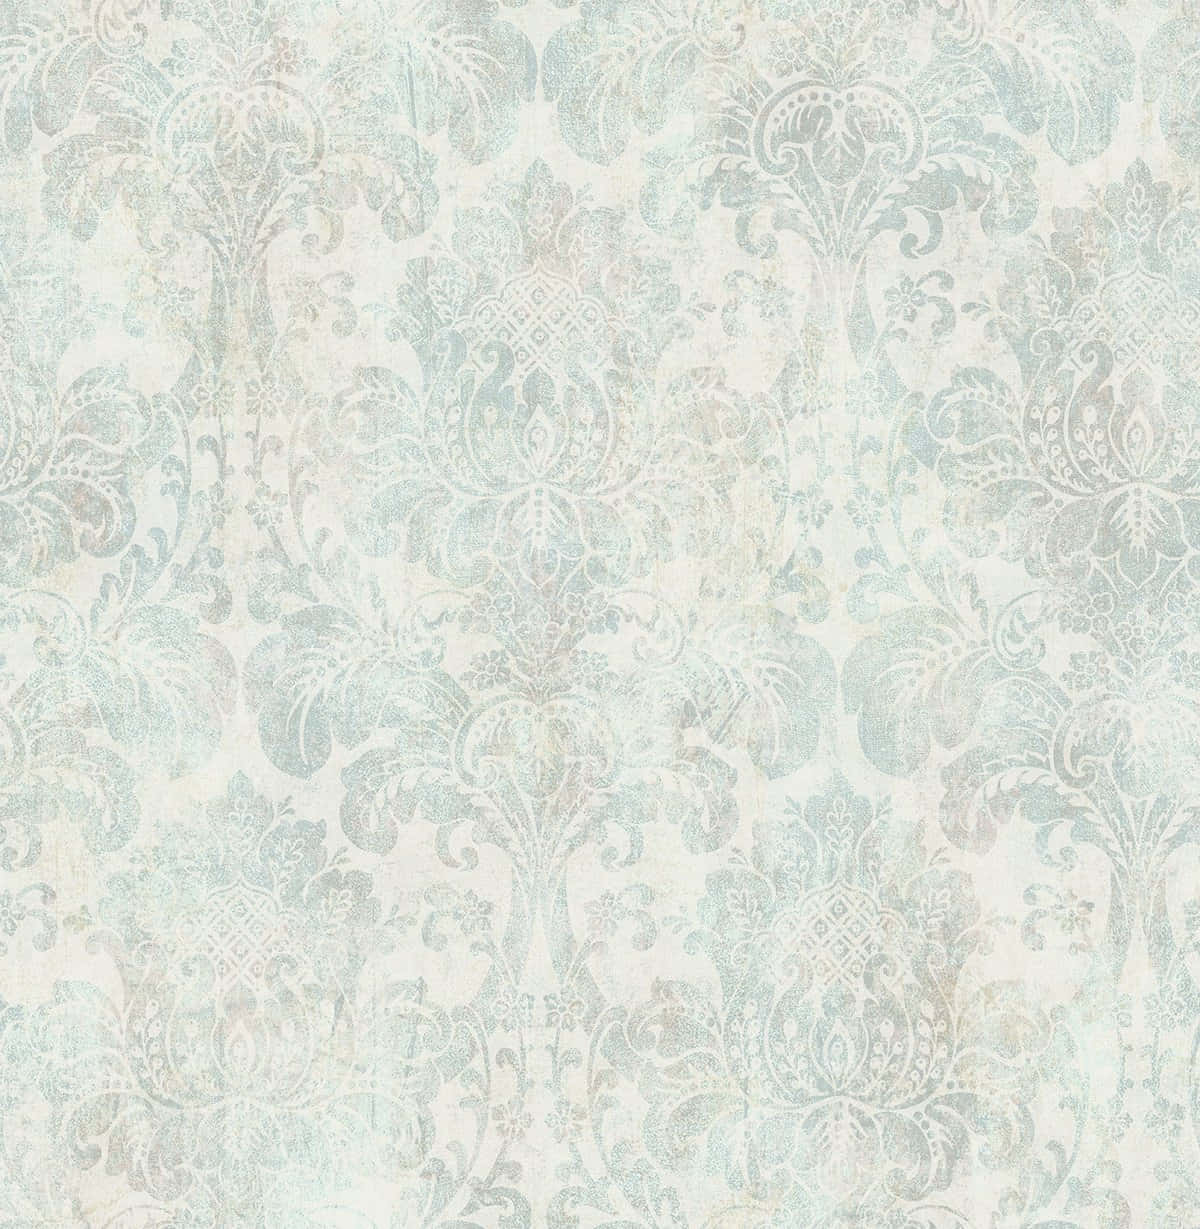 Vintage Chic Distraught Wallpaper